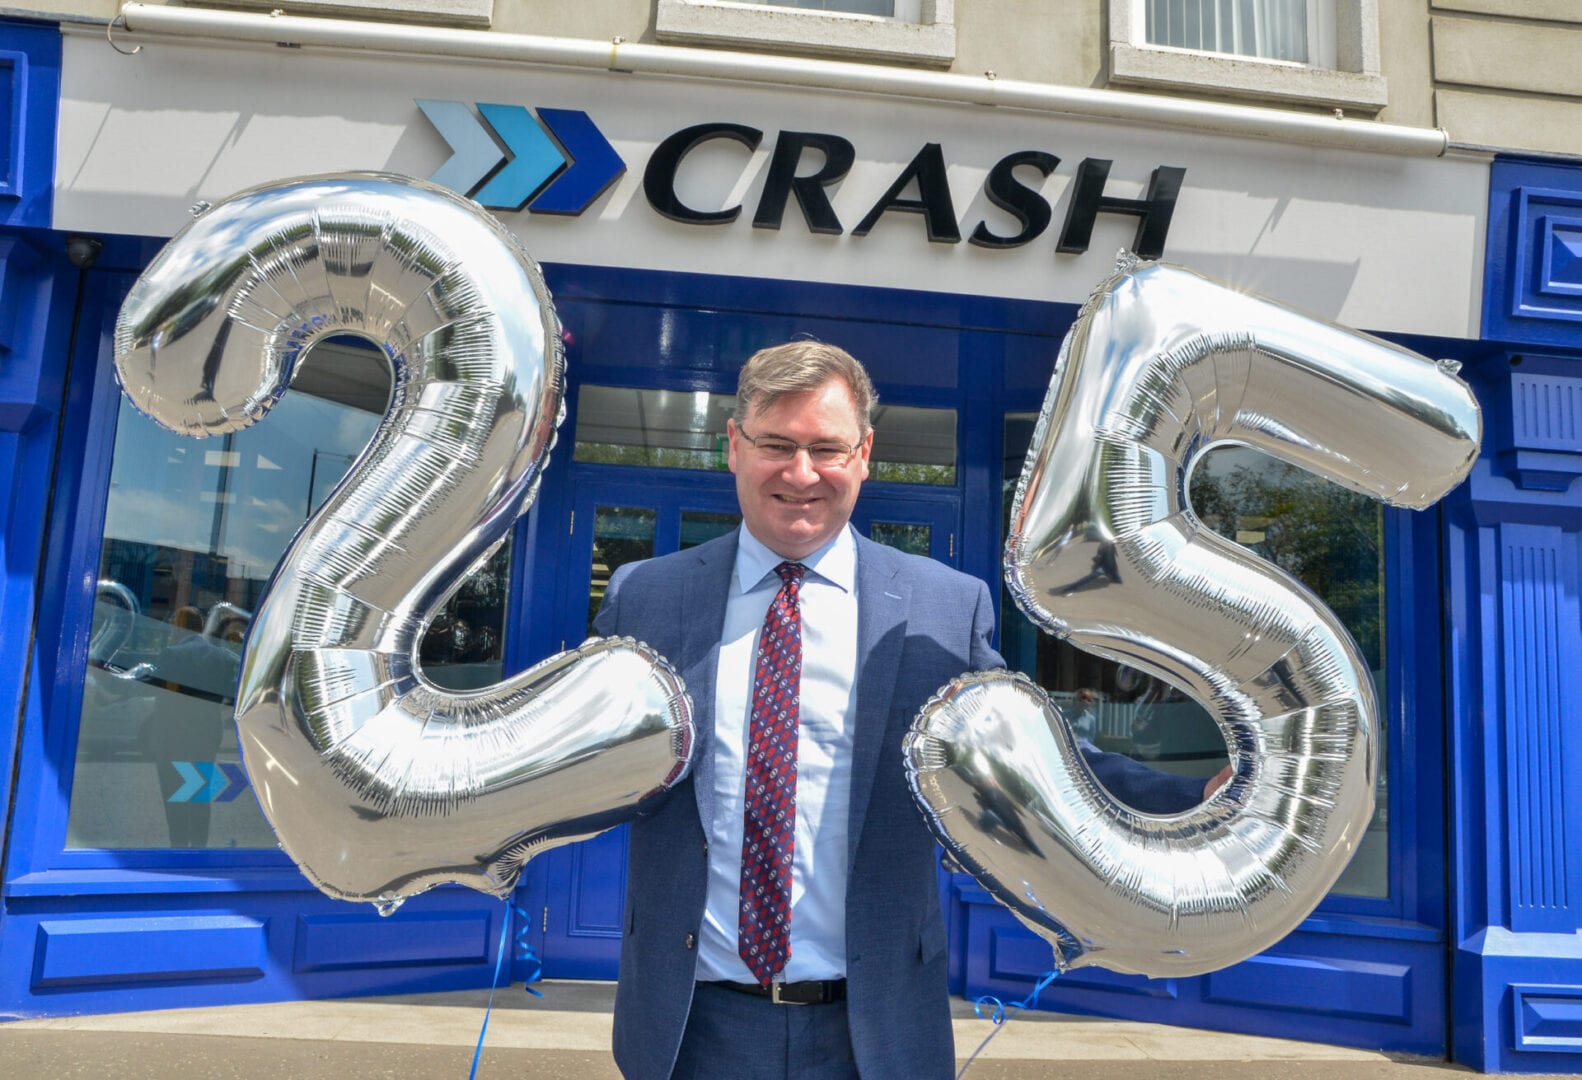 CRASH Services celebrates 25 years in business!